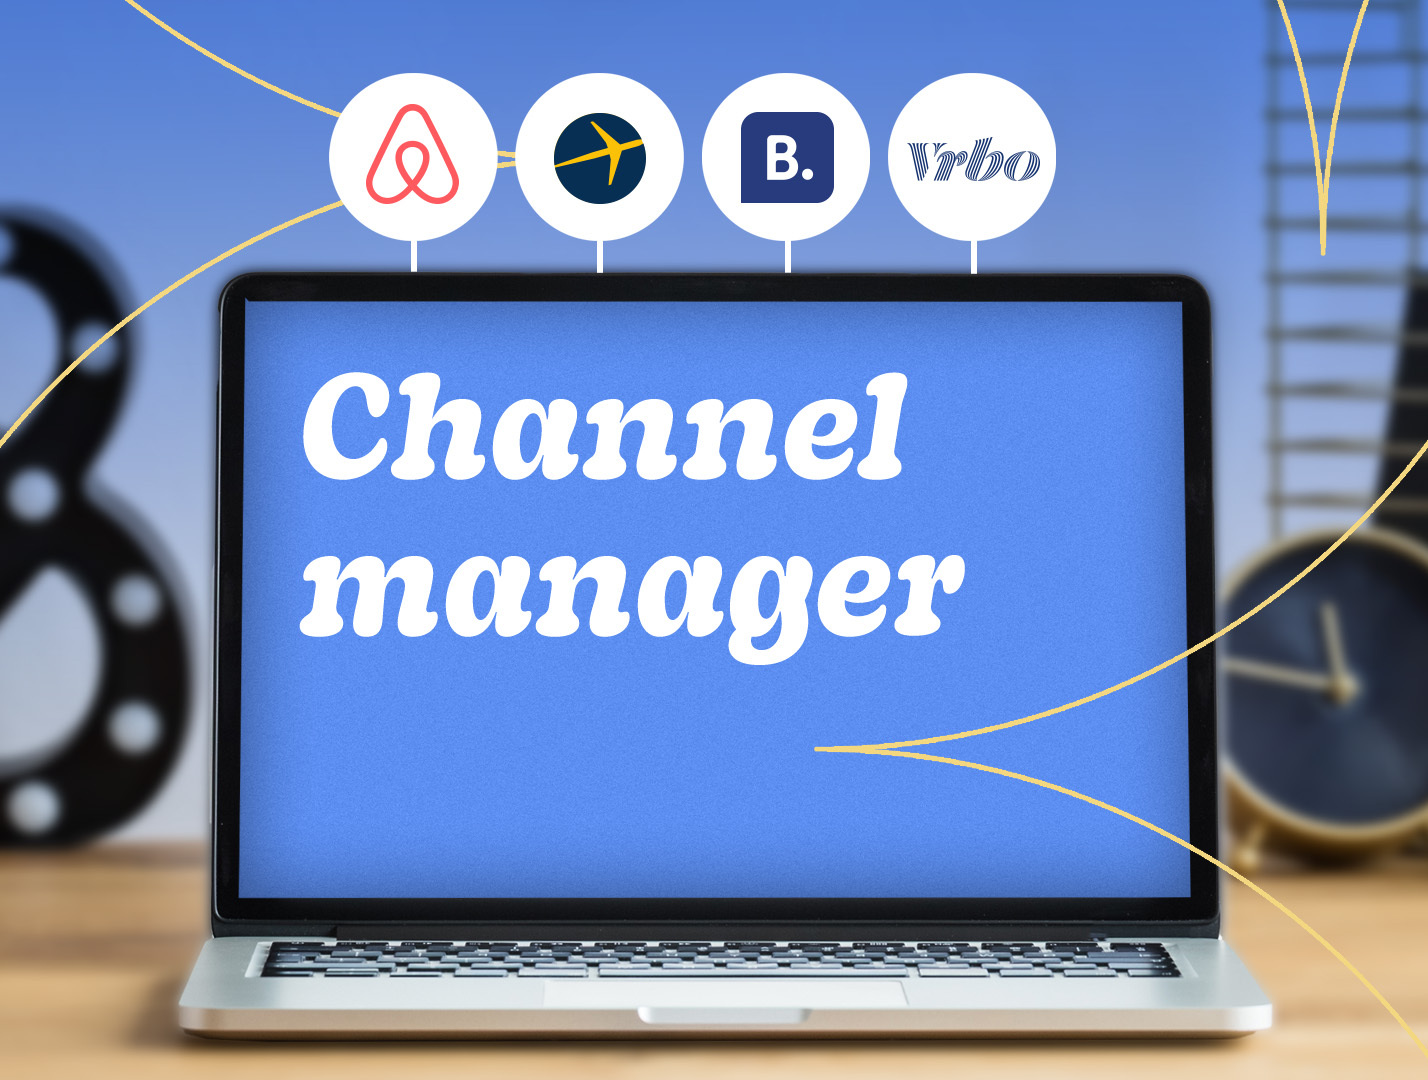 meilleur_Channel_manager